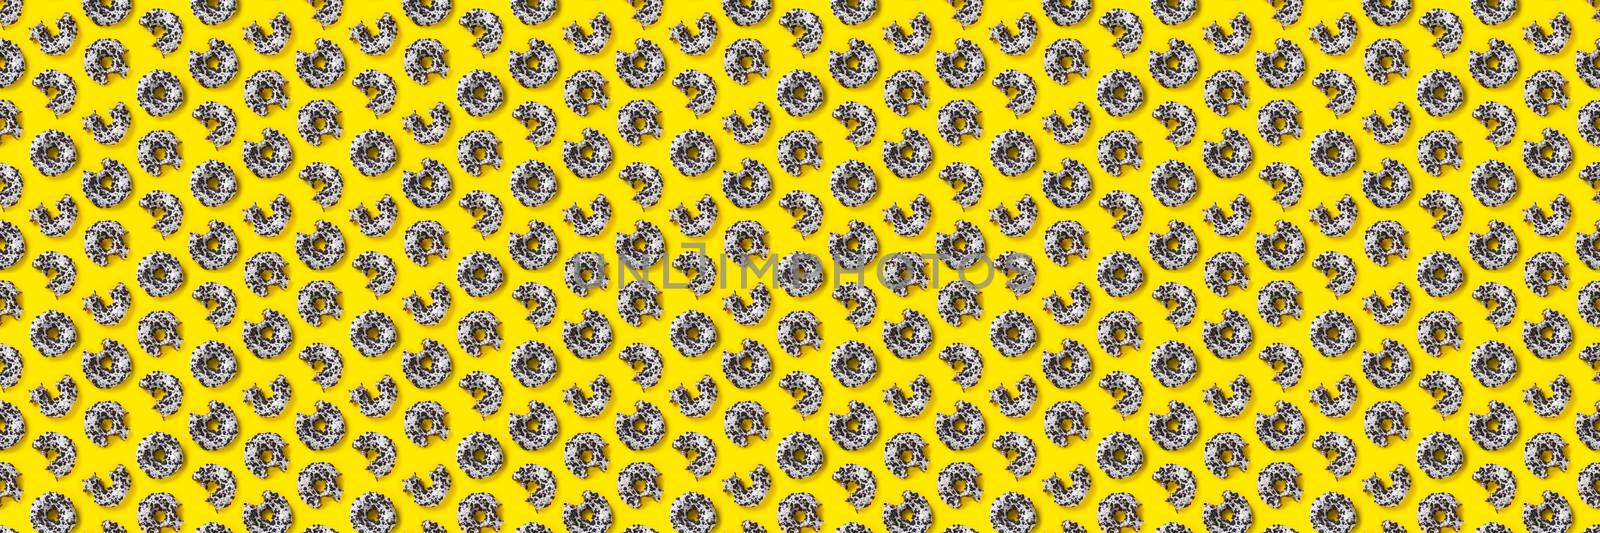 donuts on a yellow background top view. Flat lay of delicious nibbled chocolate donuts. used as donut banner or poster background, not pattern. by PhotoTime